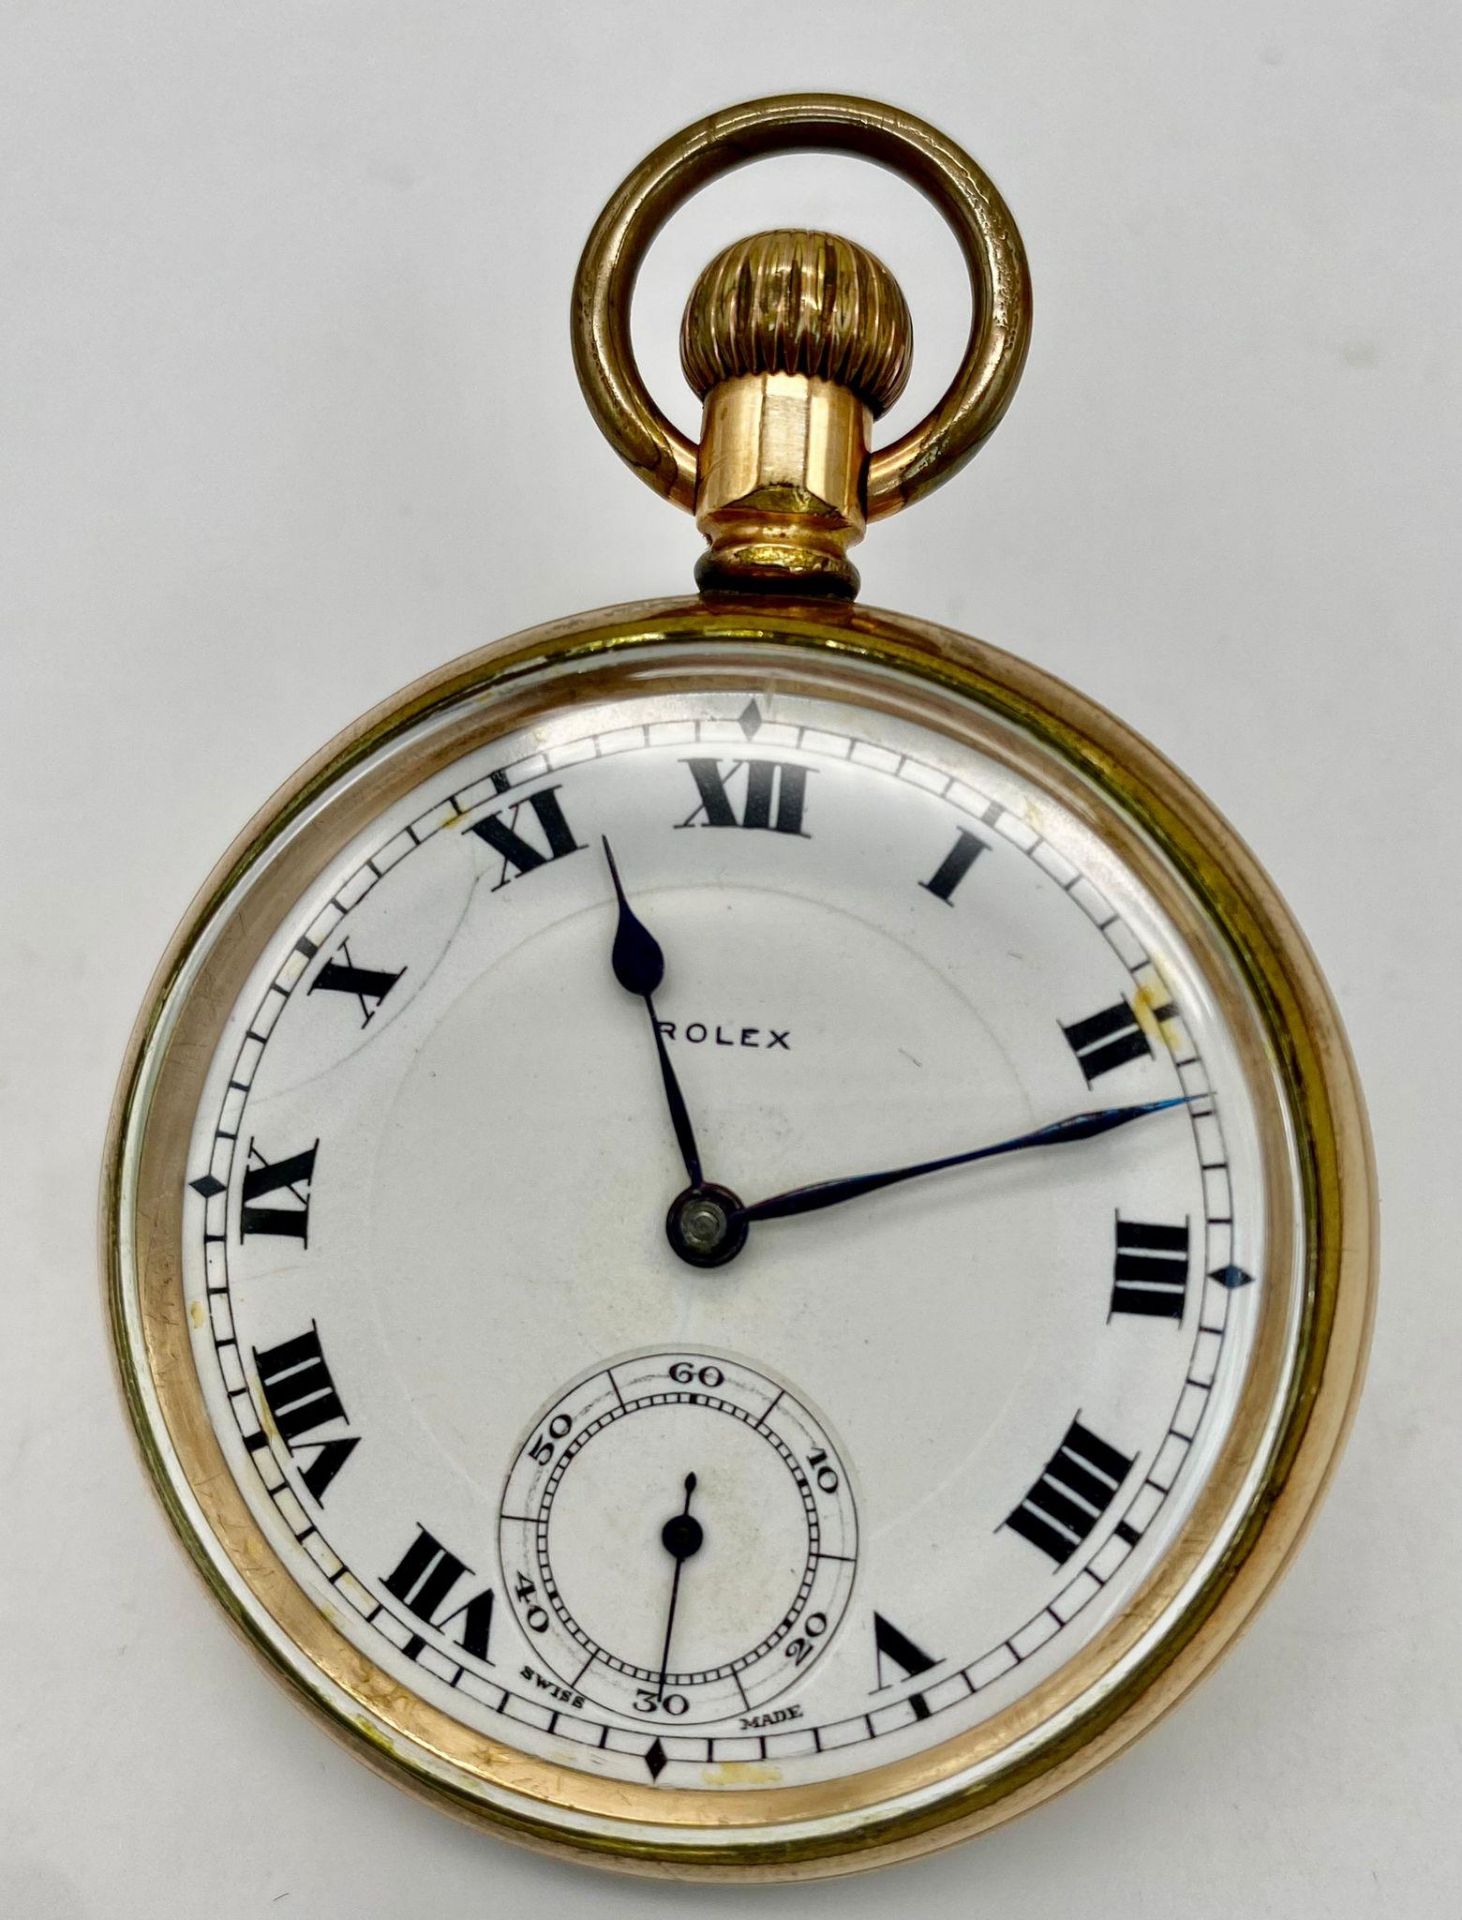 A Very Collectible Antique Rolex Gold Plated Extra Prima Pocket watch. 17 jewels. Signed extra prima